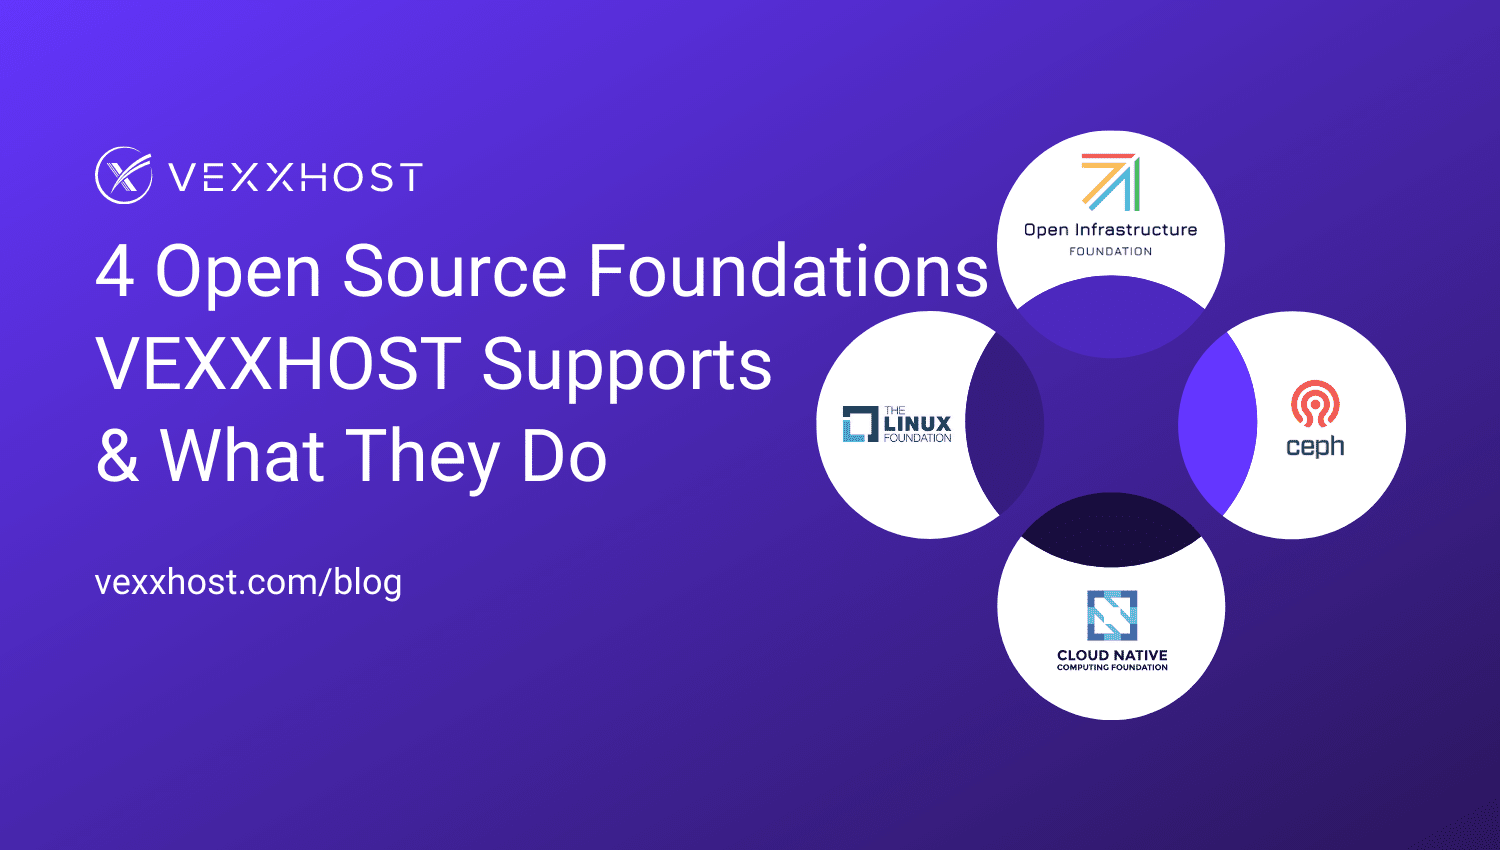 4 Open Source Foundations VEXXHOST Supports and What They Do